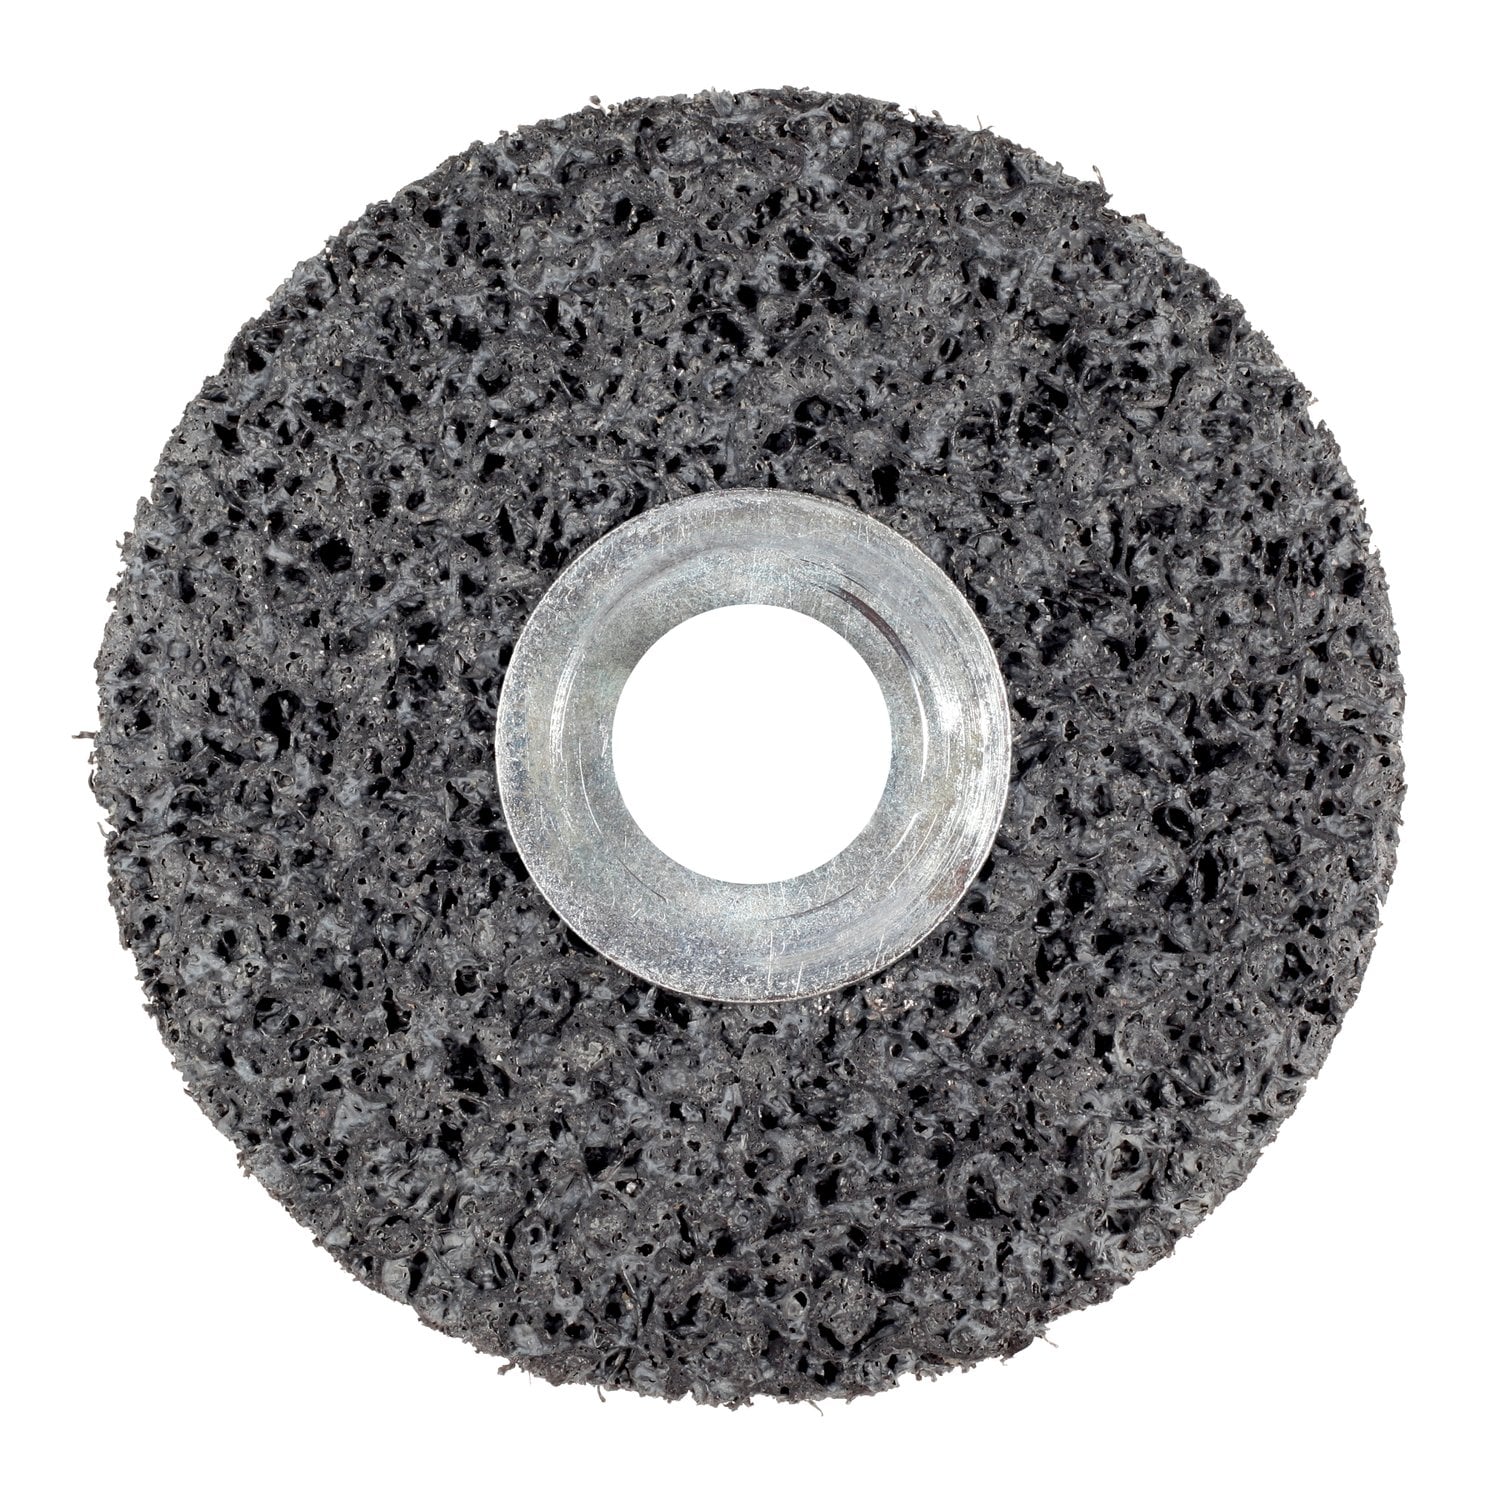 7100013253 - Scotch-Brite Clean and Strip Unitized Wheel, CS-UW, 7S Extra Coarse,
MISC x 3/4 in x MISC, Config